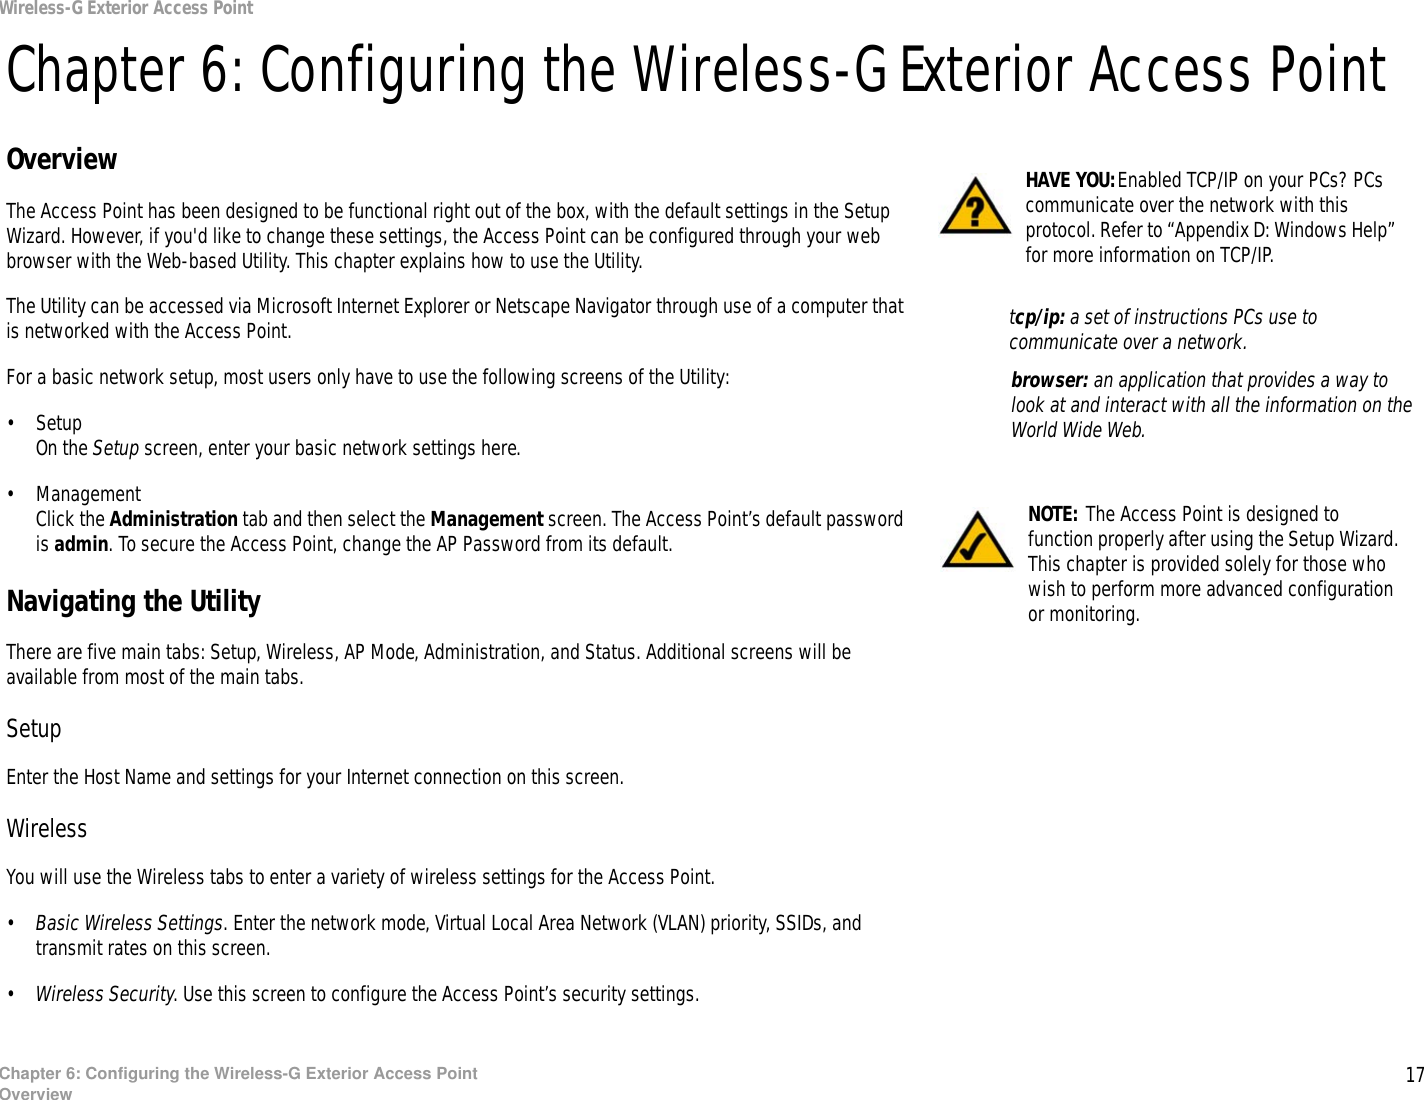 17Chapter 6: Configuring the Wireless-G Exterior Access PointOverviewWireless-G Exterior Access PointChapter 6: Configuring the Wireless-G Exterior Access PointOverviewThe Access Point has been designed to be functional right out of the box, with the default settings in the Setup Wizard. However, if you&apos;d like to change these settings, the Access Point can be configured through your web browser with the Web-based Utility. This chapter explains how to use the Utility.The Utility can be accessed via Microsoft Internet Explorer or Netscape Navigator through use of a computer that is networked with the Access Point.For a basic network setup, most users only have to use the following screens of the Utility:• SetupOn the Setup screen, enter your basic network settings here.• ManagementClick the Administration tab and then select the Management screen. The Access Point’s default password is admin. To secure the Access Point, change the AP Password from its default.Navigating the UtilityThere are five main tabs: Setup, Wireless, AP Mode, Administration, and Status. Additional screens will be available from most of the main tabs.SetupEnter the Host Name and settings for your Internet connection on this screen.WirelessYou will use the Wireless tabs to enter a variety of wireless settings for the Access Point.•Basic Wireless Settings. Enter the network mode, Virtual Local Area Network (VLAN) priority, SSIDs, and transmit rates on this screen.•Wireless Security. Use this screen to configure the Access Point’s security settings.HAVE YOU:Enabled TCP/IP on your PCs? PCs communicate over the network with this protocol. Refer to “Appendix D: Windows Help” for more information on TCP/IP.NOTE: The Access Point is designed to function properly after using the Setup Wizard. This chapter is provided solely for those who wish to perform more advanced configuration or monitoring.browser: an application that provides a way to look at and interact with all the information on the World Wide Web. tcp/ip: a set of instructions PCs use to communicate over a network.